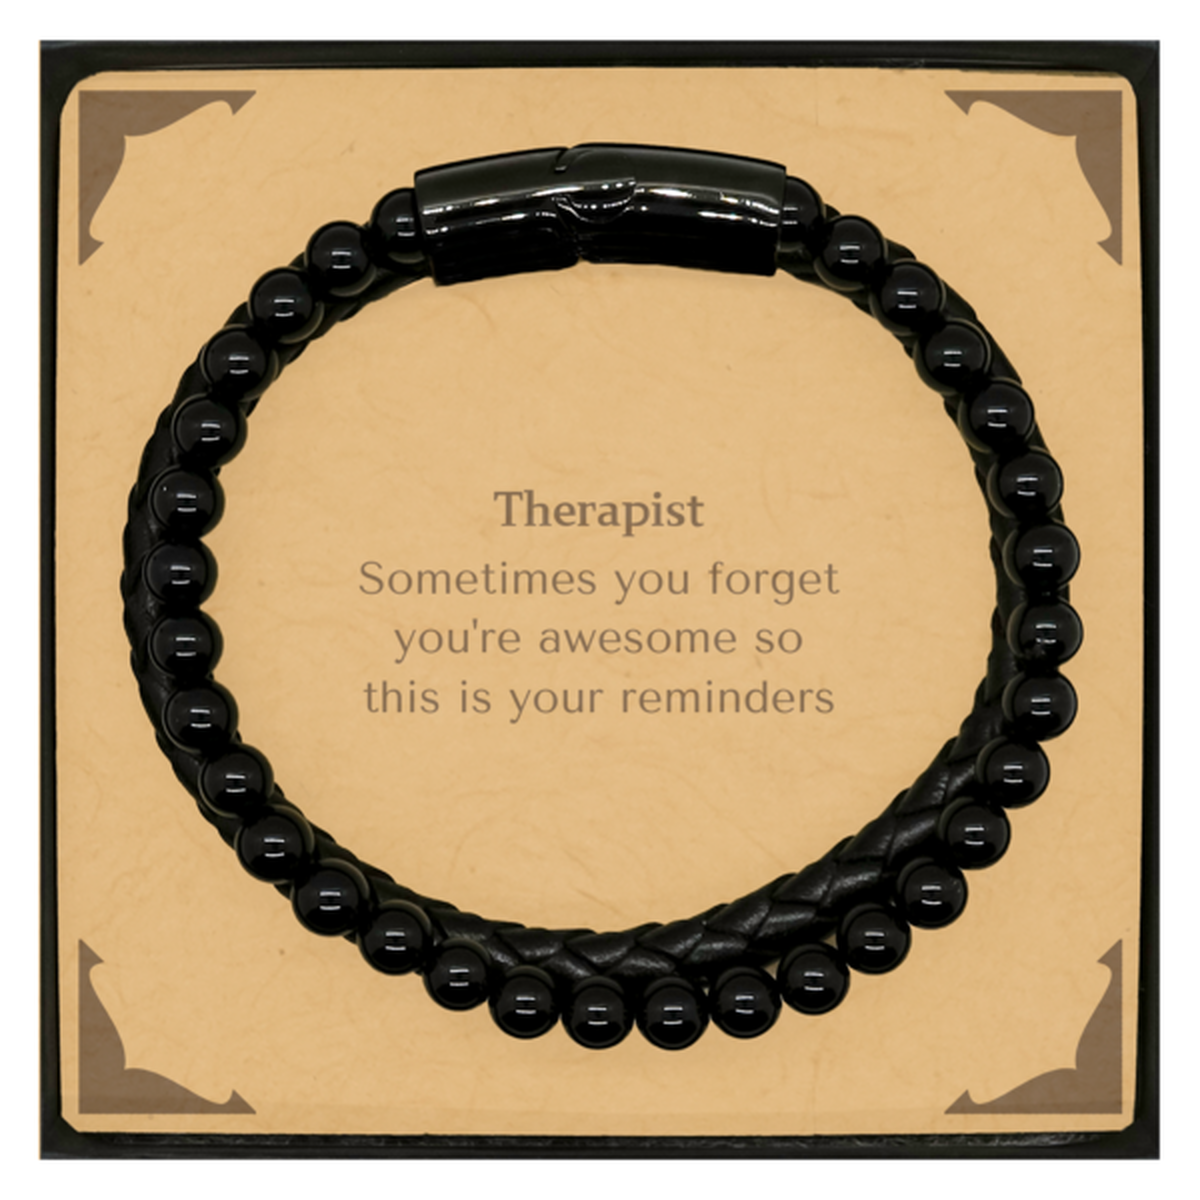 Sentimental Therapist Stone Leather Bracelets, Therapist Sometimes you forget you're awesome so this is your reminders, Graduation Christmas Birthday Gifts for Therapist, Men, Women, Coworkers